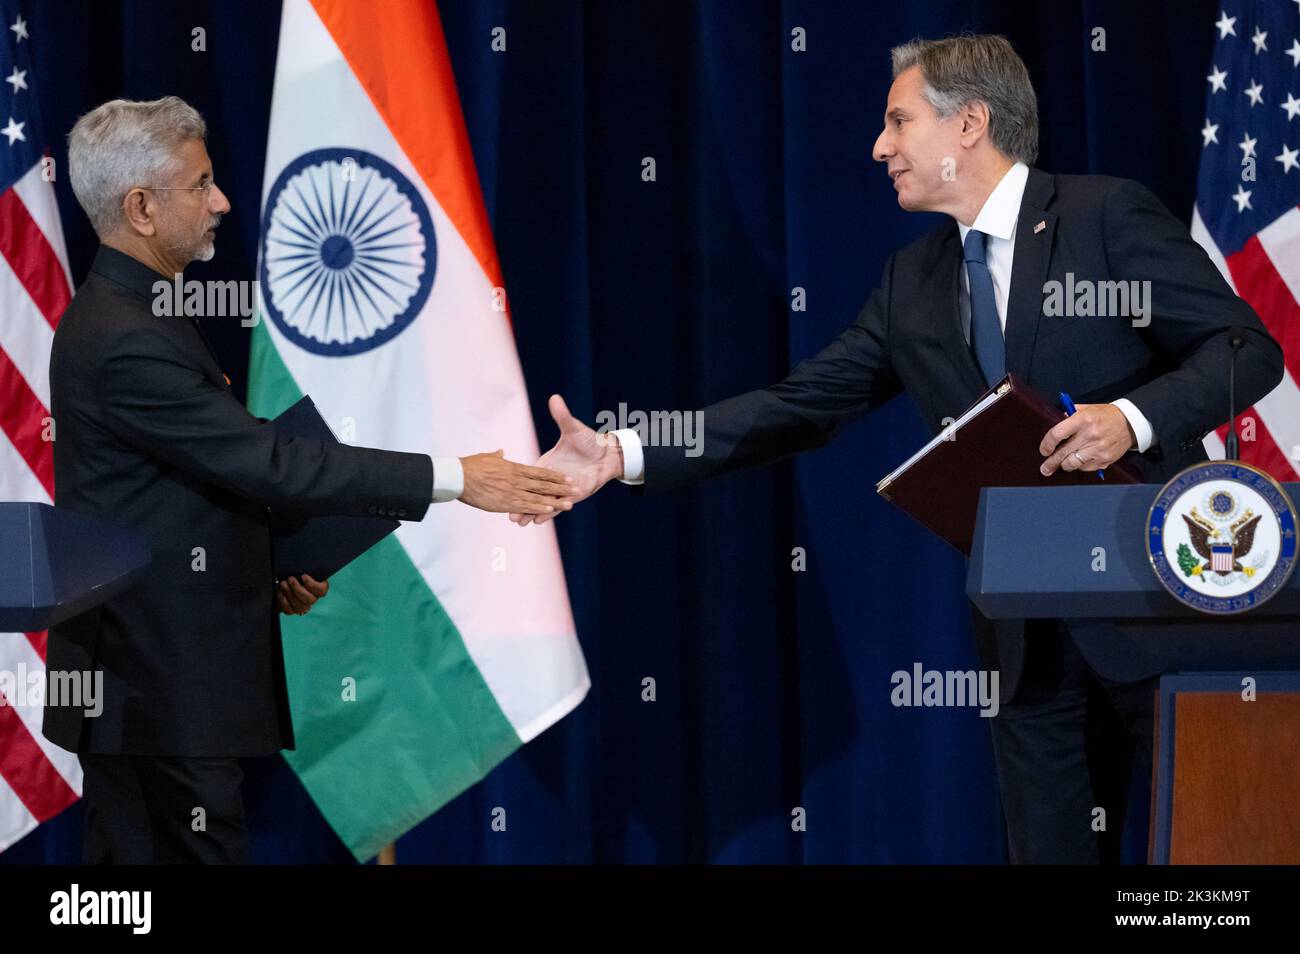 U.S. Secretary of State Antony Blinken and India's Foreign Minister Subrahmanyam Jaishankar shake hands during a news conference at the State Department in Washington, U.S., September 27, 2022. Saul Loeb/Pool via REUTERS Stock Photo